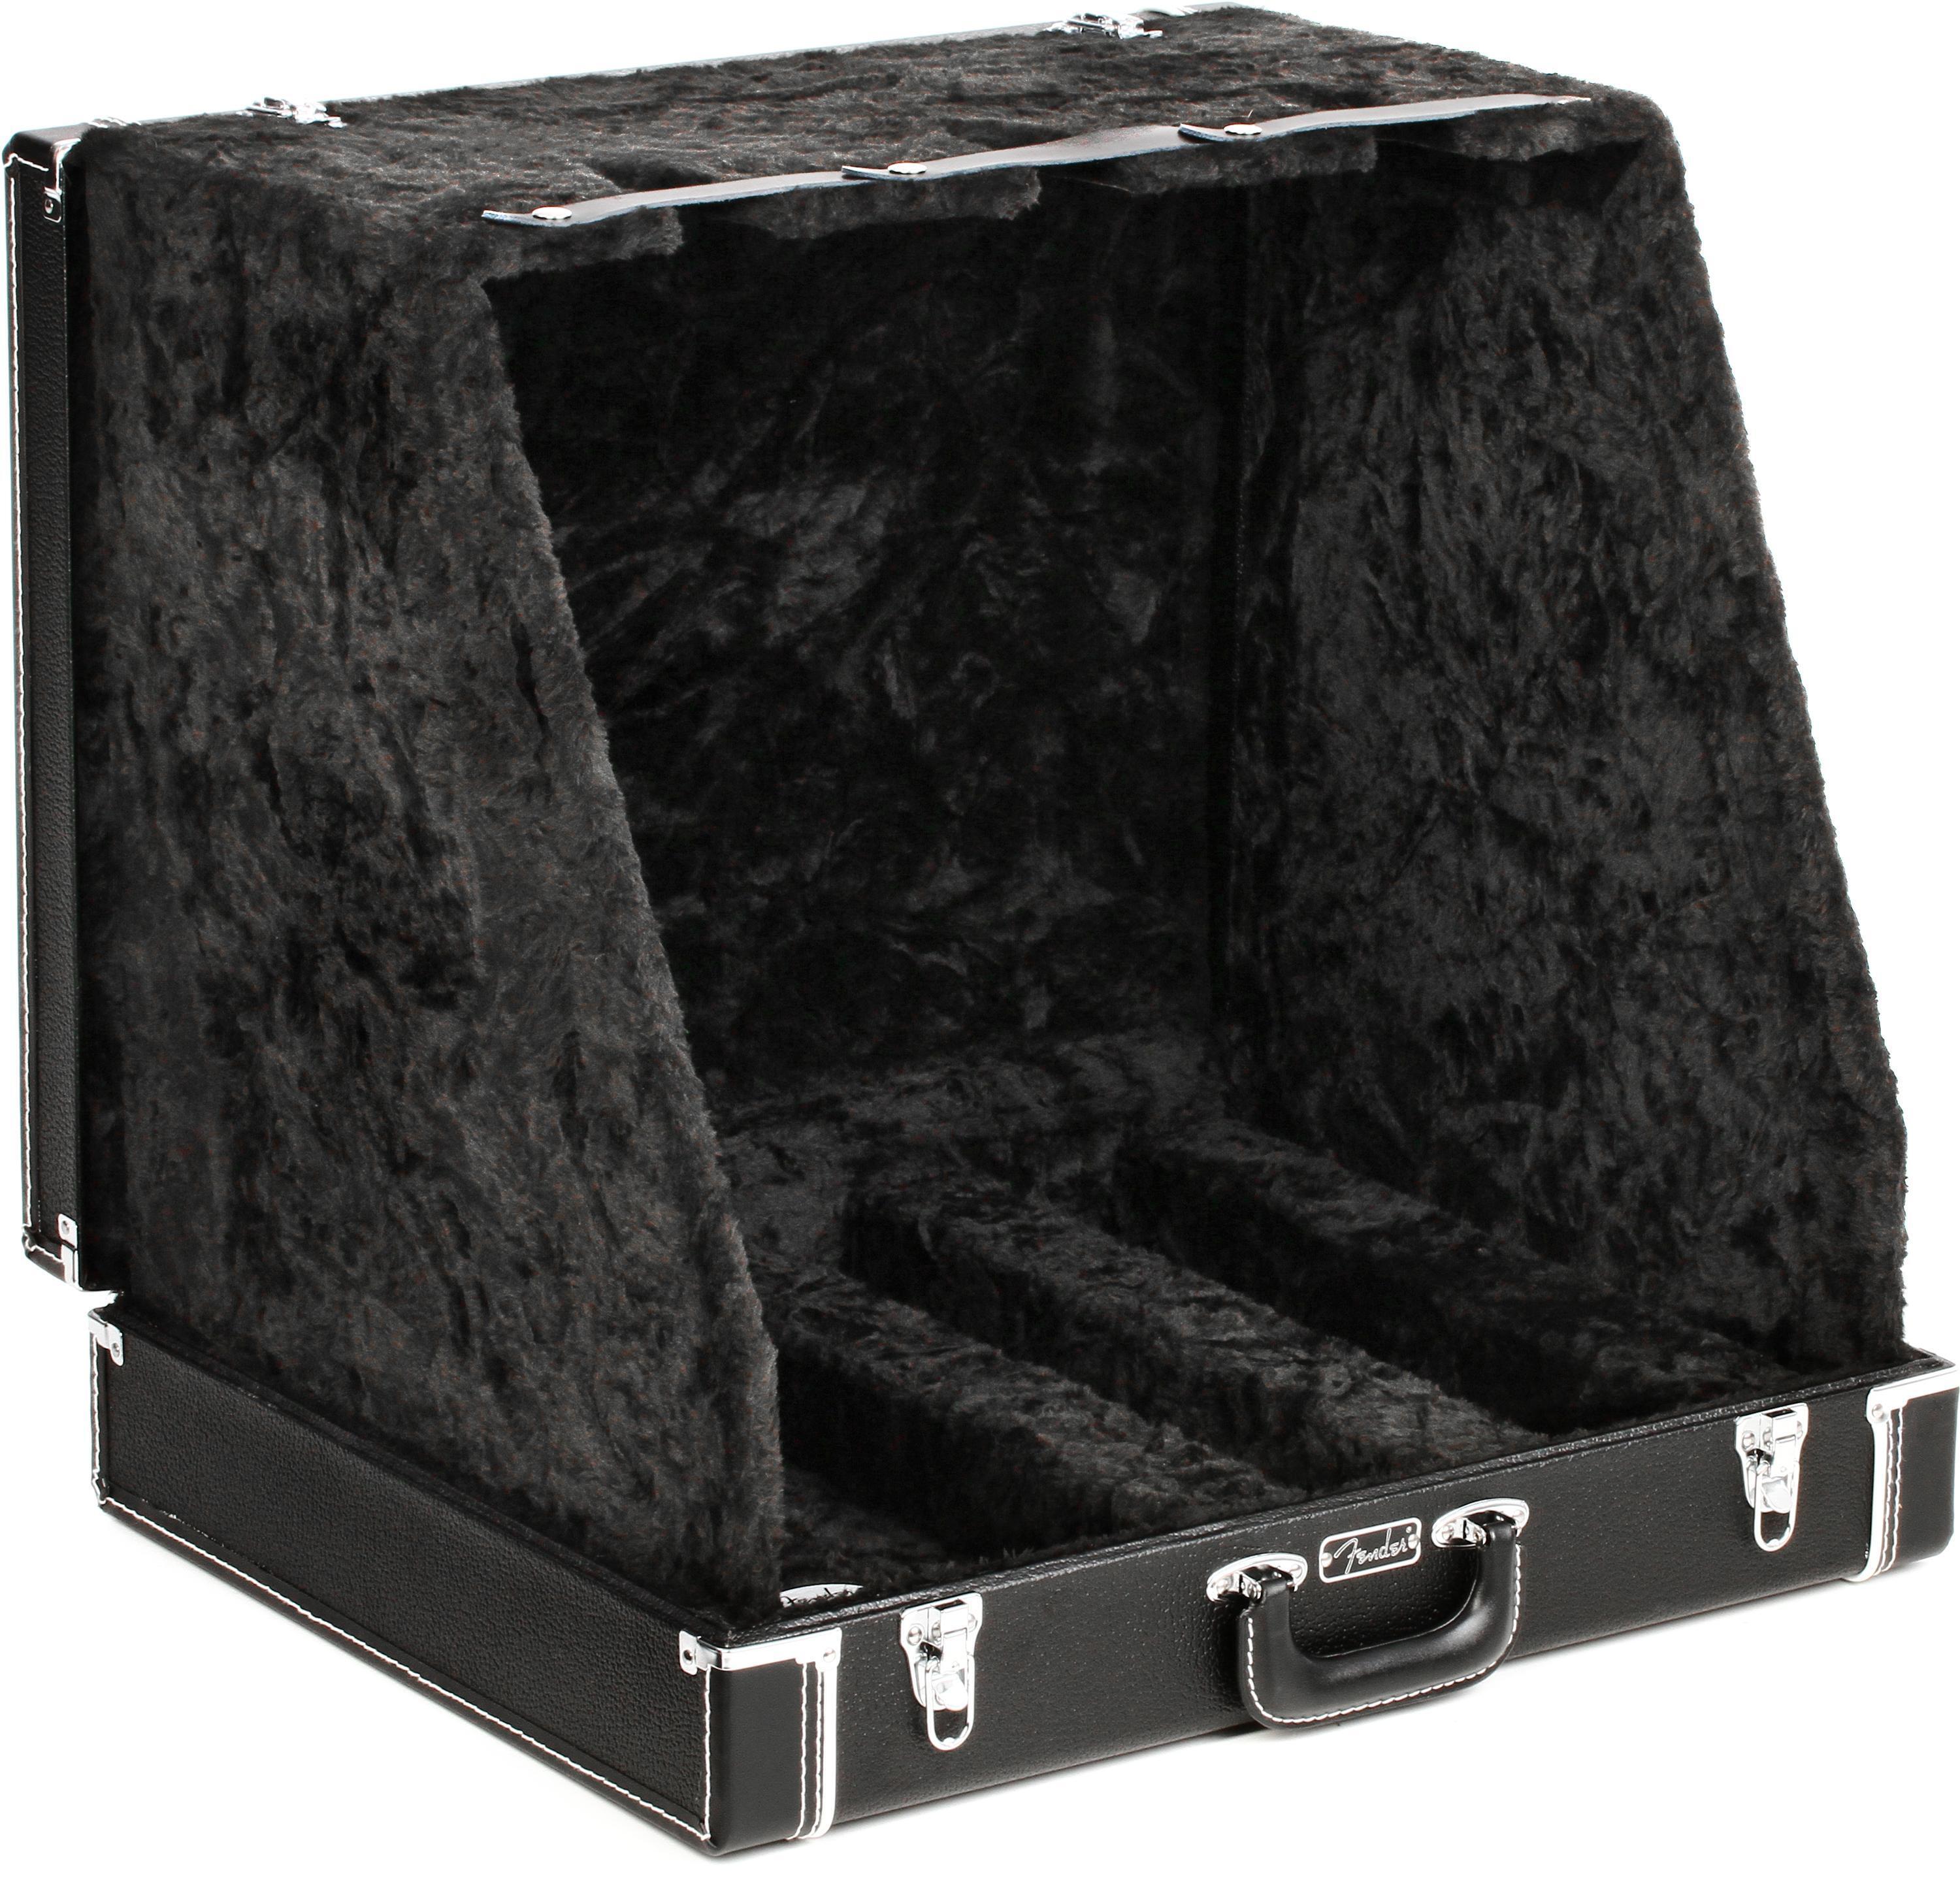 Fender Classic Series 3 Guitar Case Stand - Black | Sweetwater